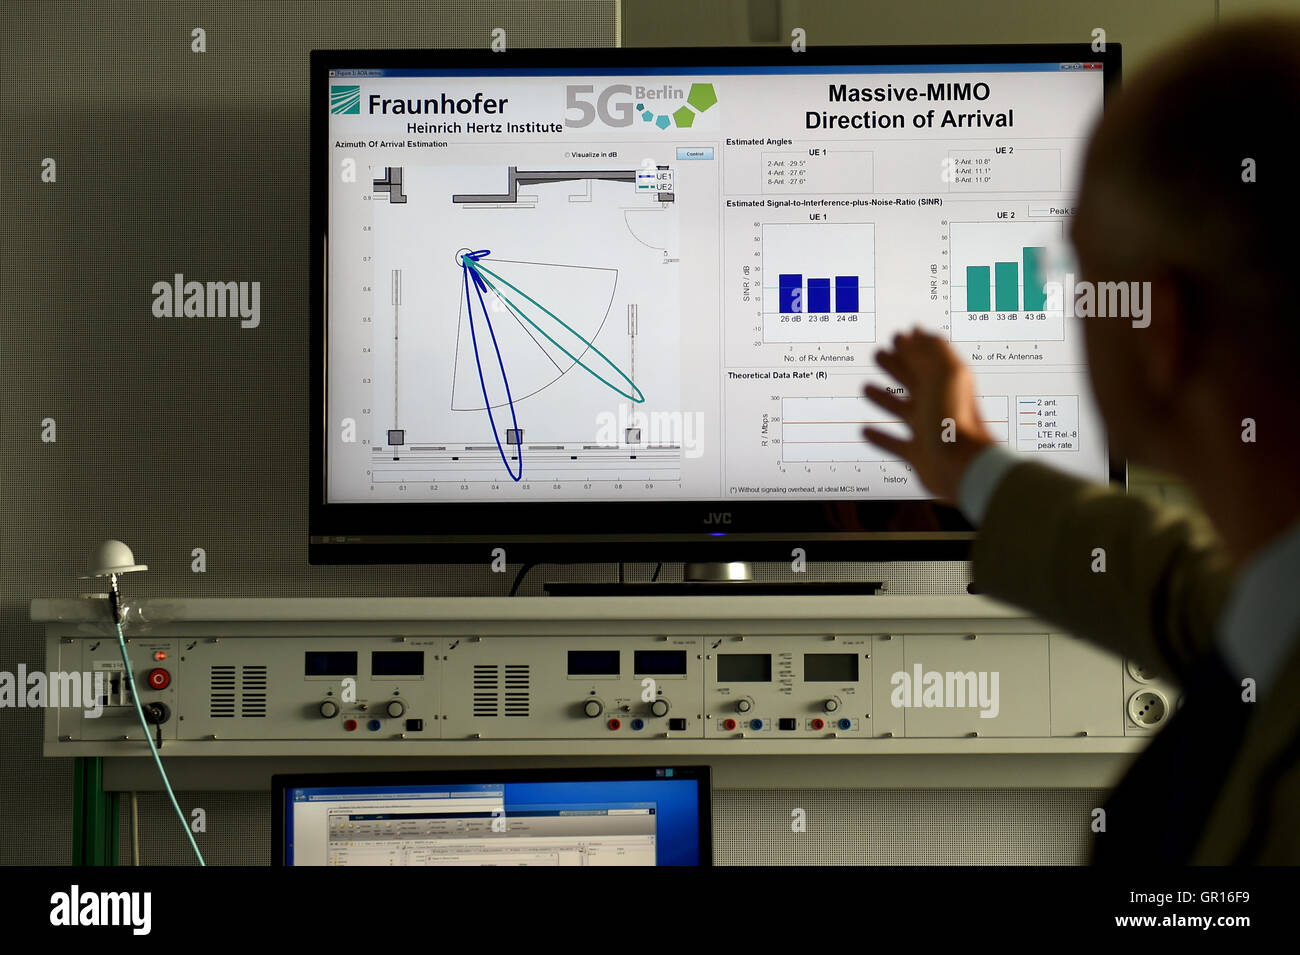 Thomas Haustein, a researcher at the Fraunhofer Heinrich-Hertz-Institut, points to a monitor showing the '5G-Radio-Massive MIMO' antenna technology, with regard to research on the 5G mobile communication standard, at the Fraunhofer Heinrich-Hertz-Institut in Berlin, Germany, 5 September 2016. Berlin is to be the location for the development of the 5G network.   PHOTO: BRITTA PEDERSEN/DPA Stock Photo